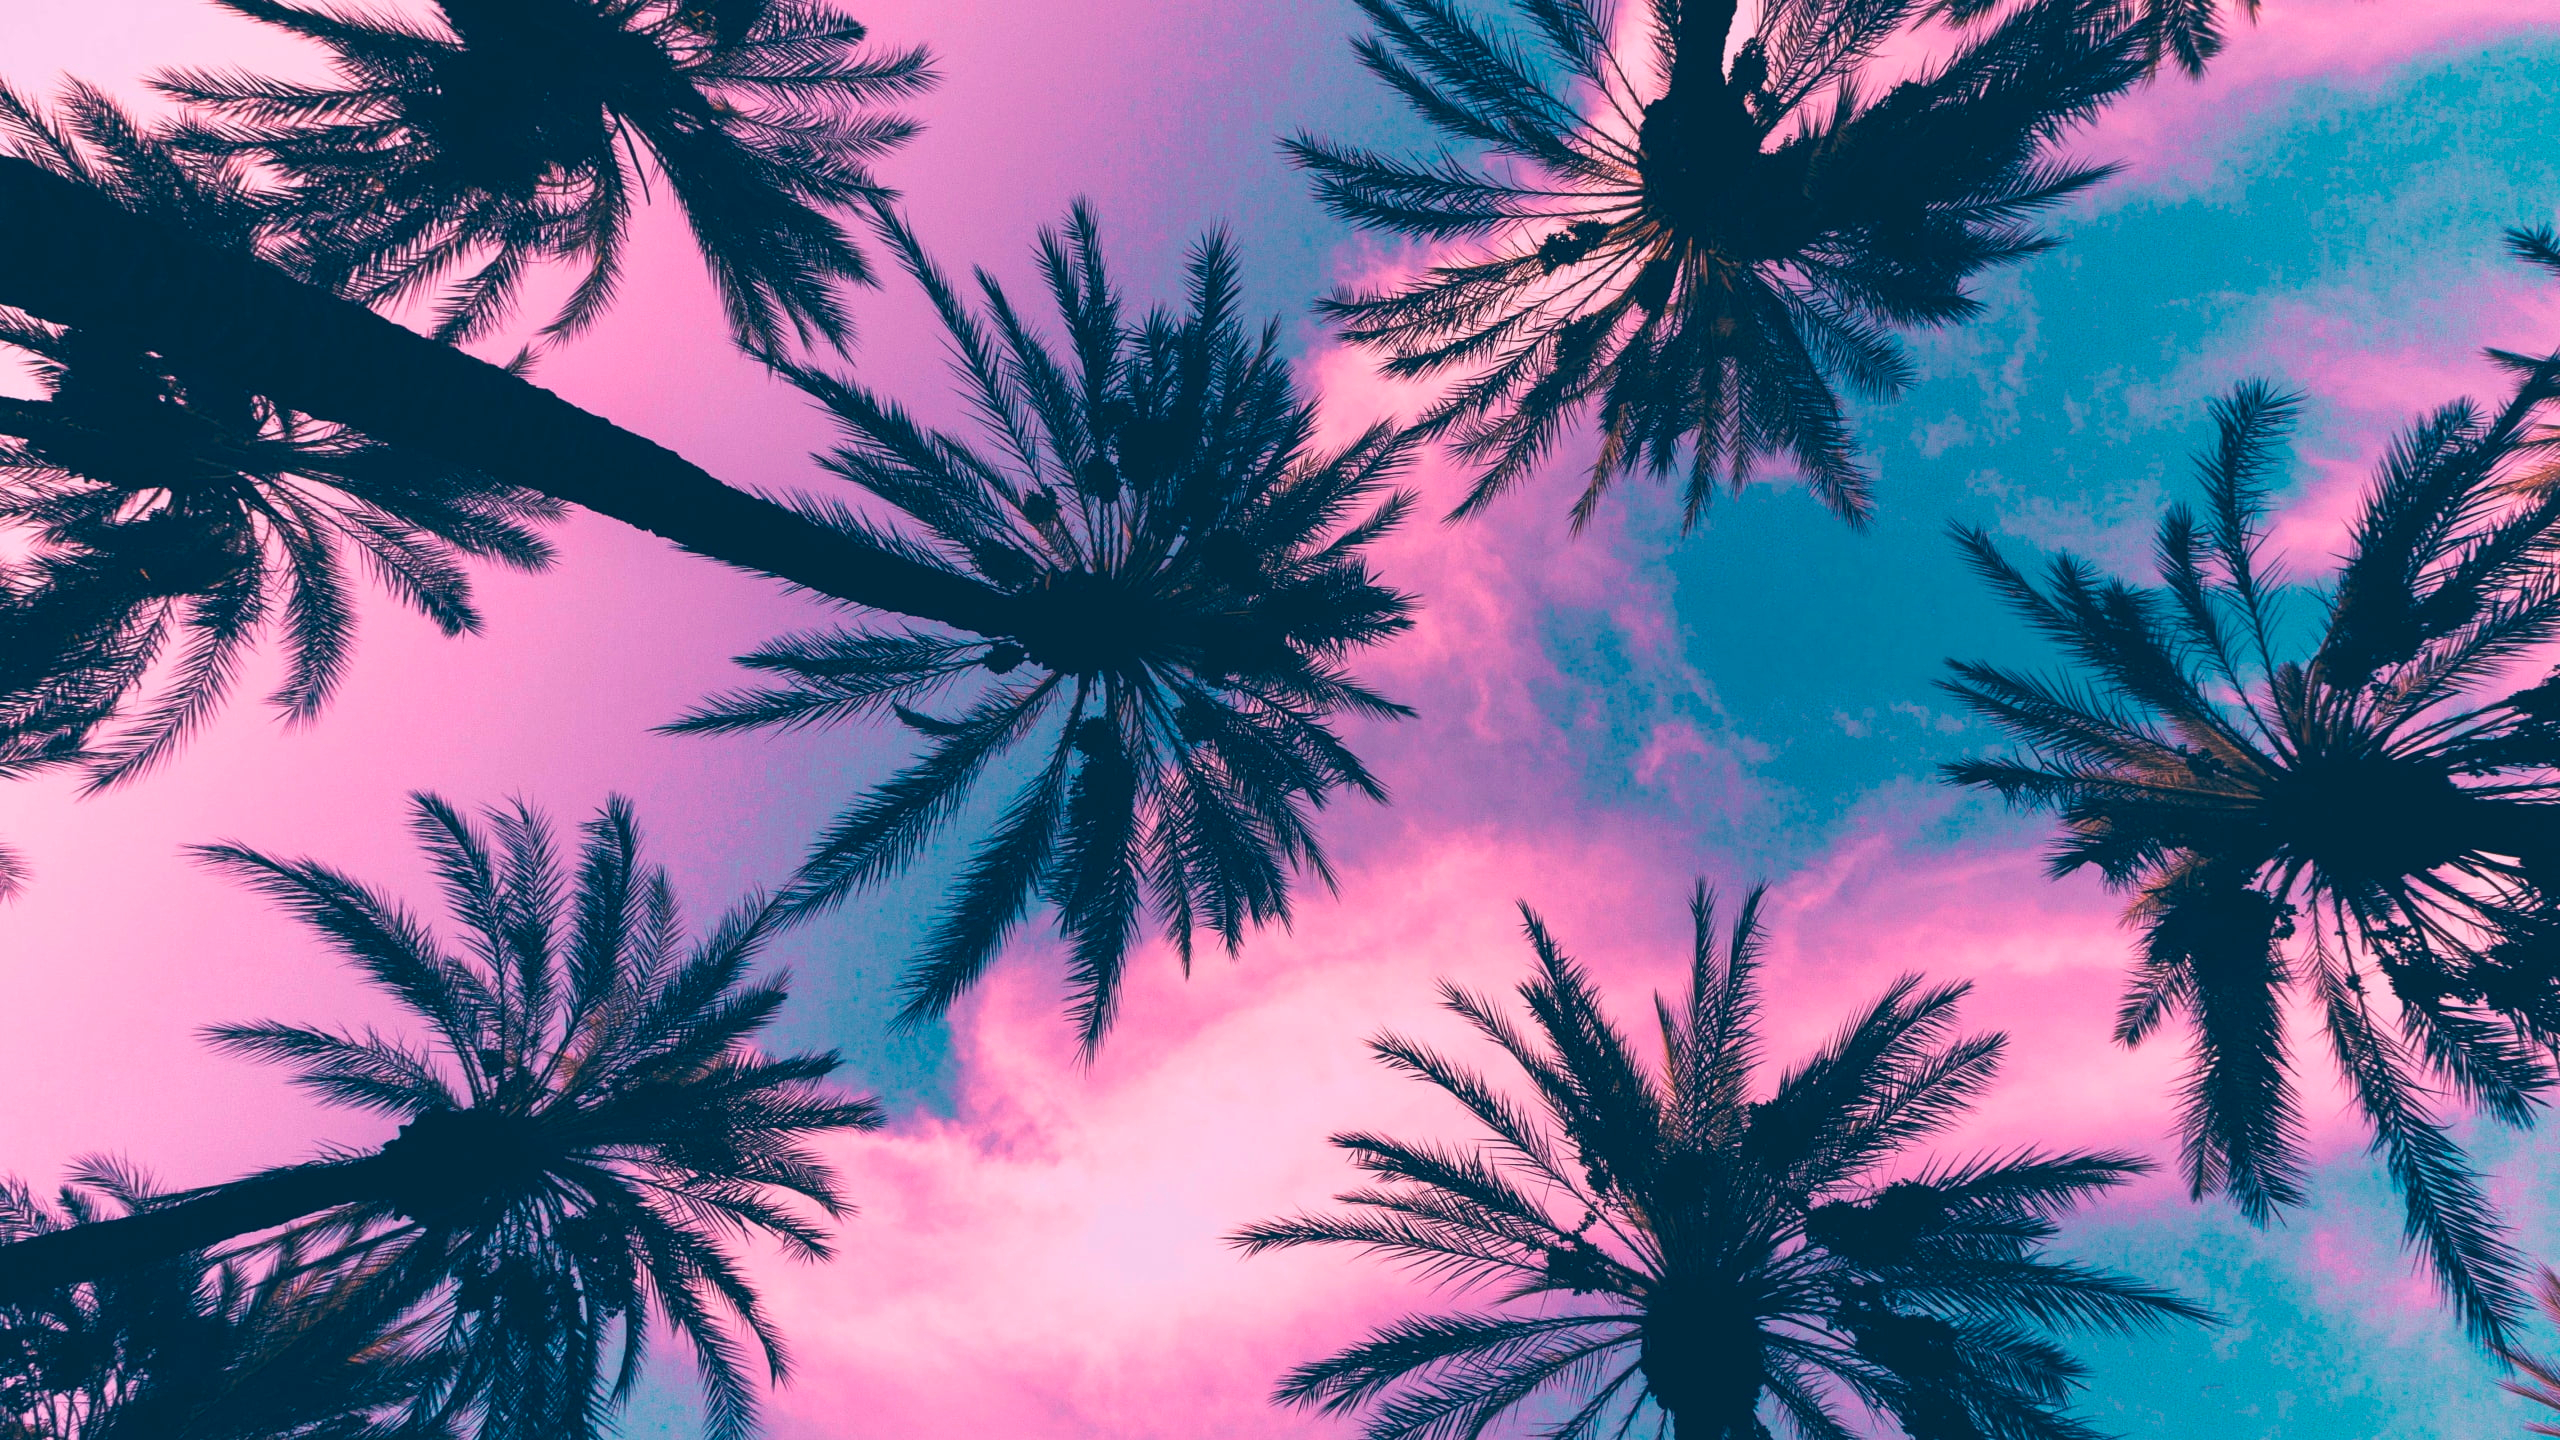 Coconut plant, palm trees, sky, clouds, pink, tropical climate wallpaper.